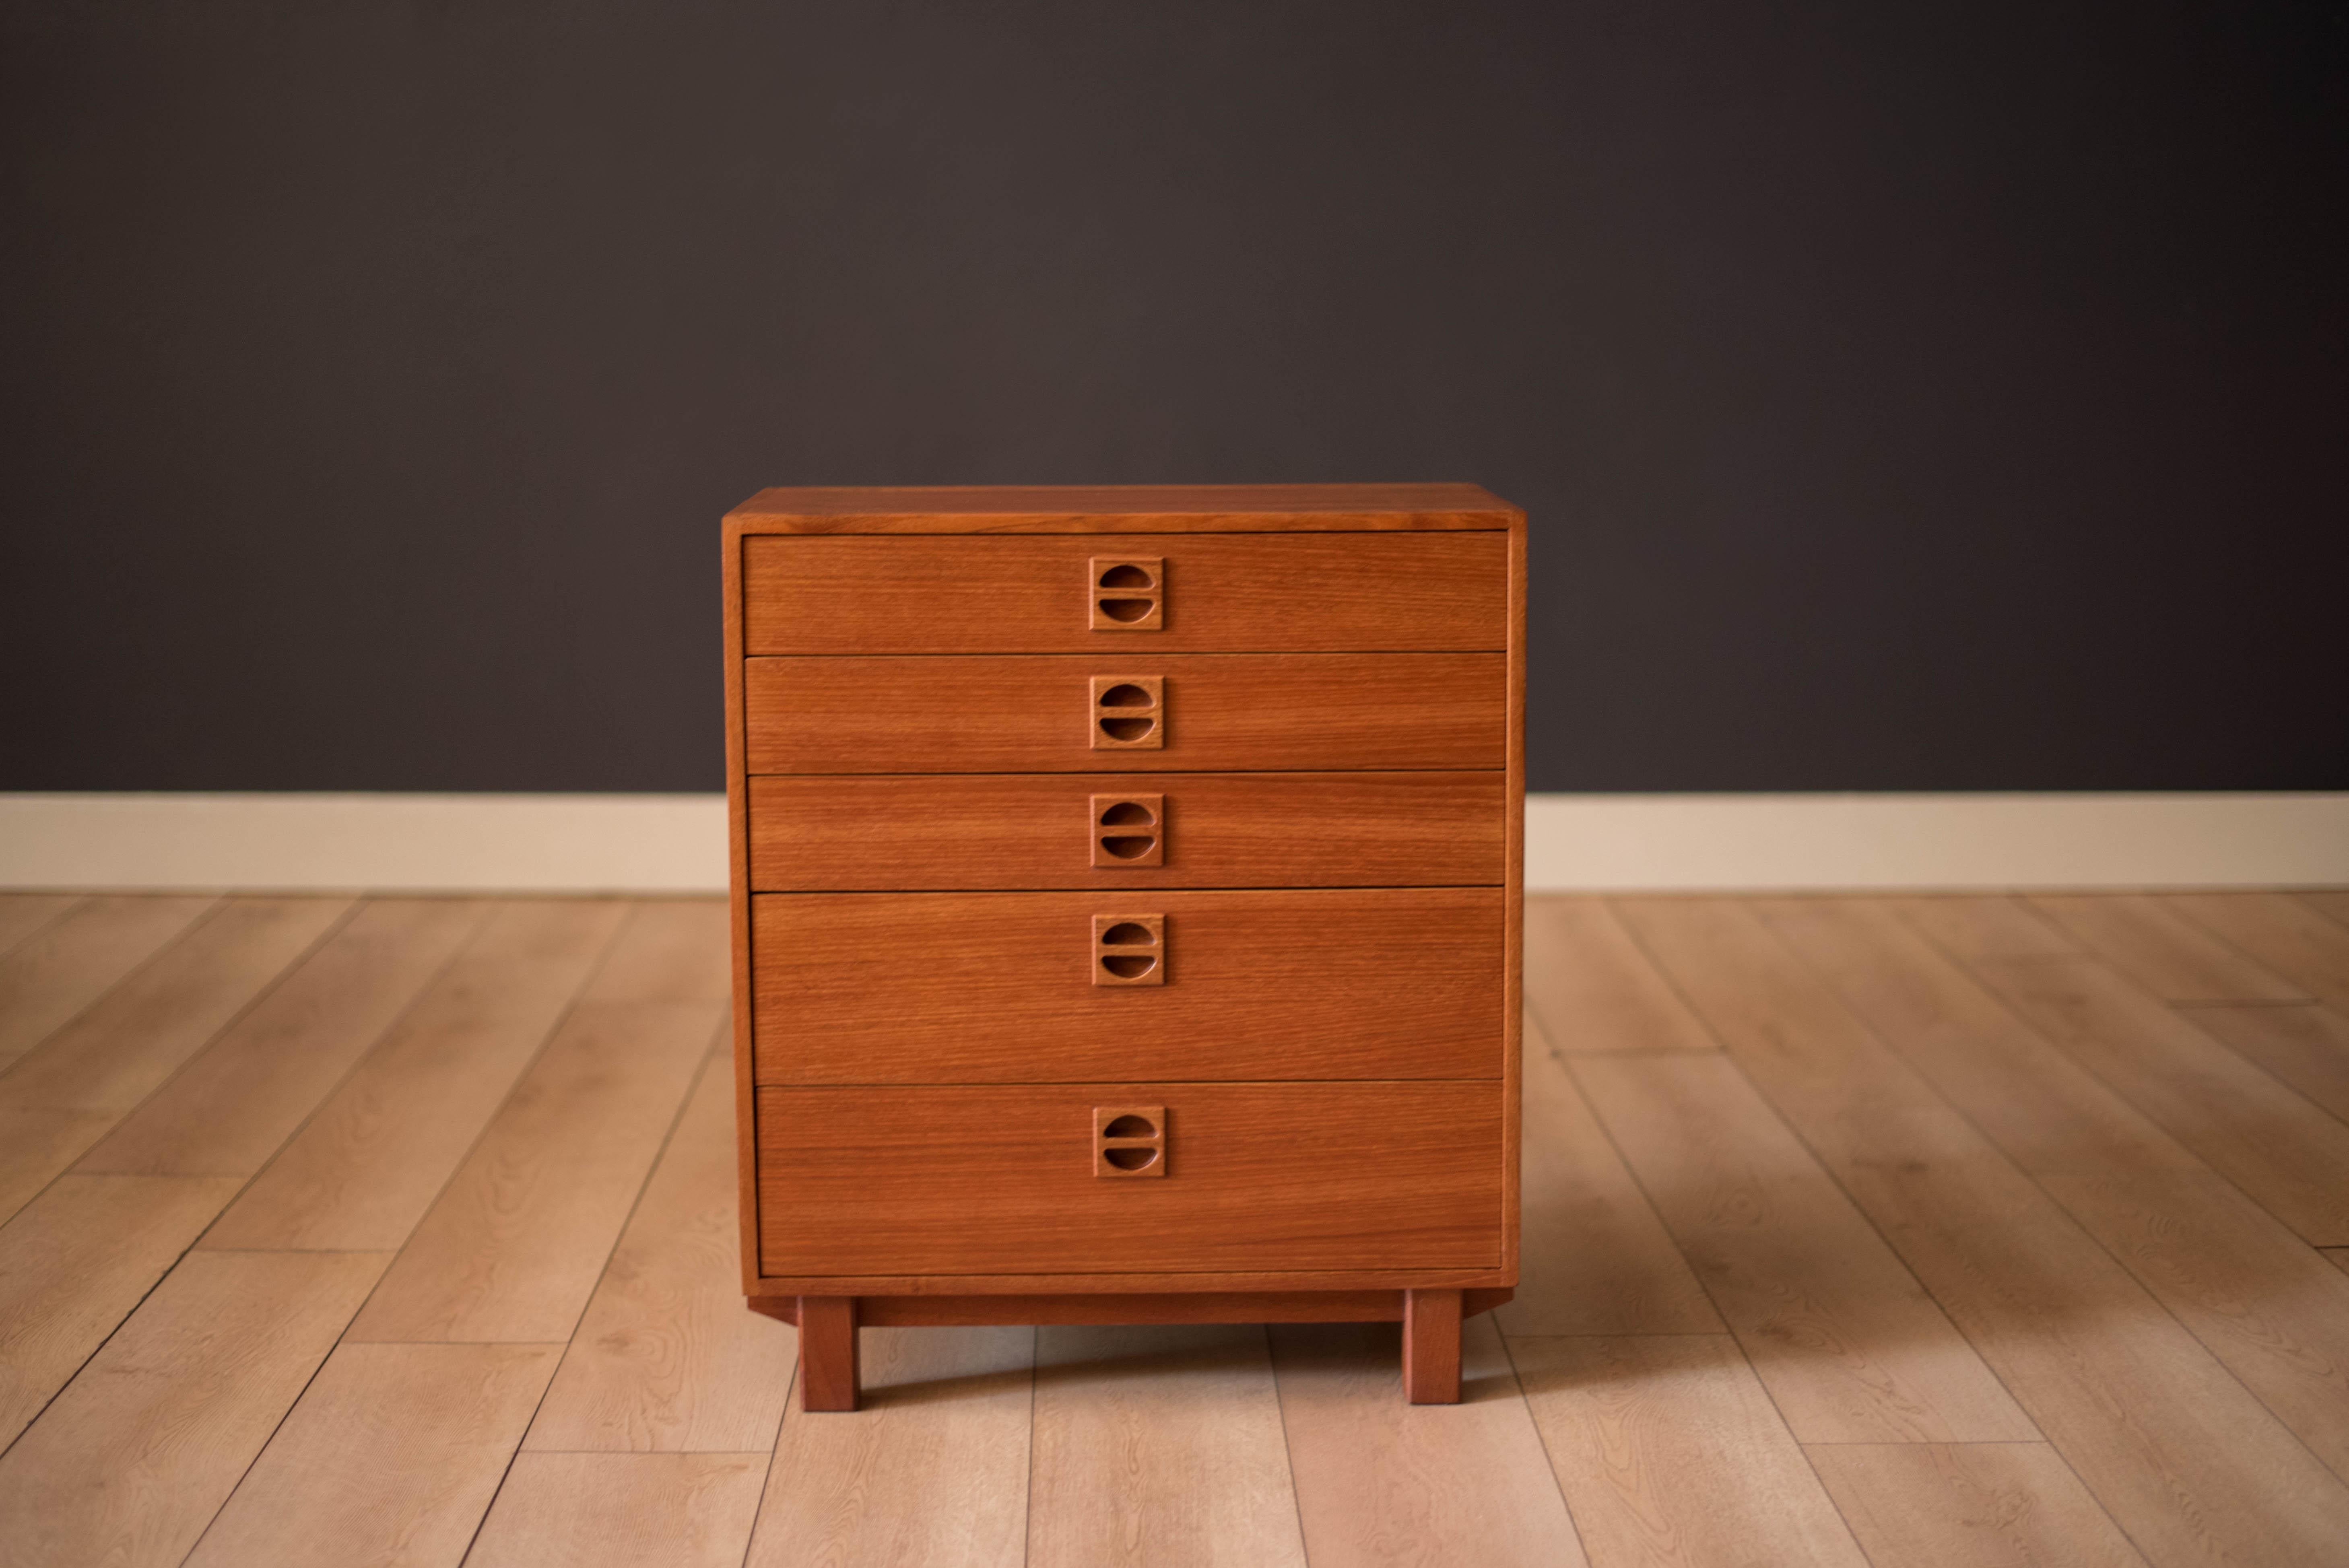 Mid-Century Modern dresser chest in solid teak circa 1970's made in Sweden. This case piece is built with exposed finger joinery and includes five drawers with dovetail construction. The perfect space saving storage solution for a bedroom or